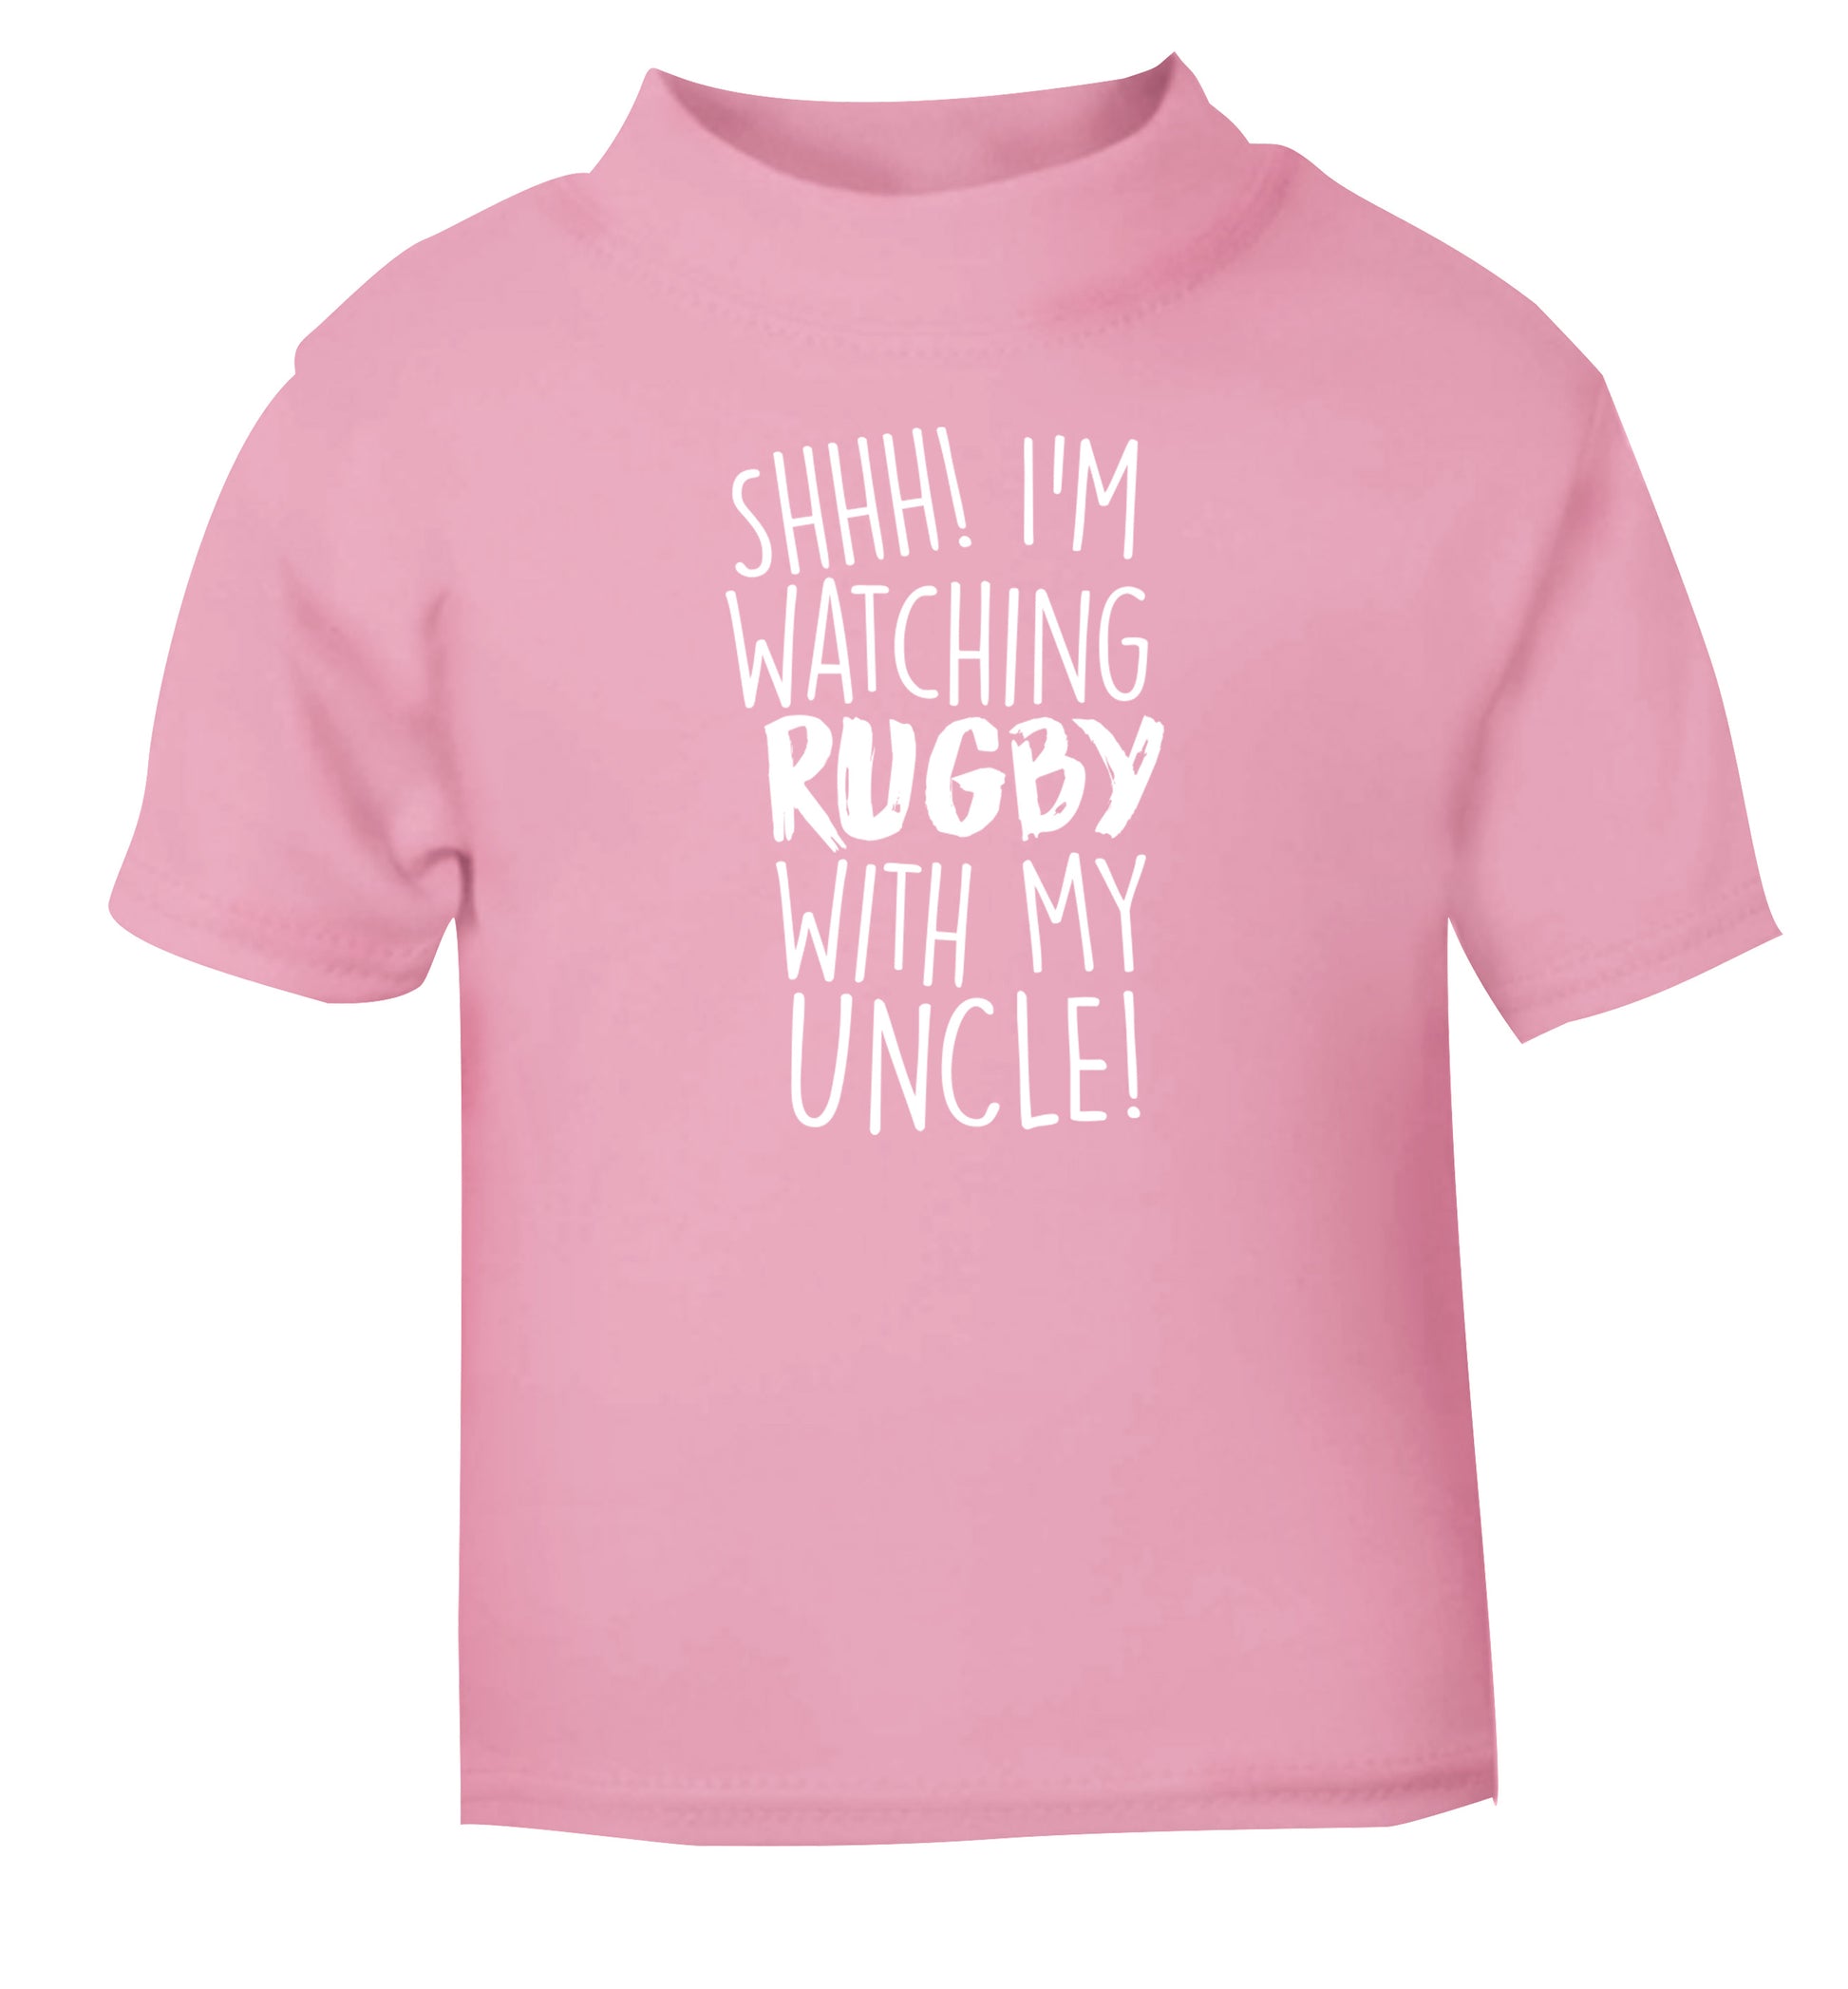 Shh.. I'm watching rugby with my uncle light pink Baby Toddler Tshirt 2 Years